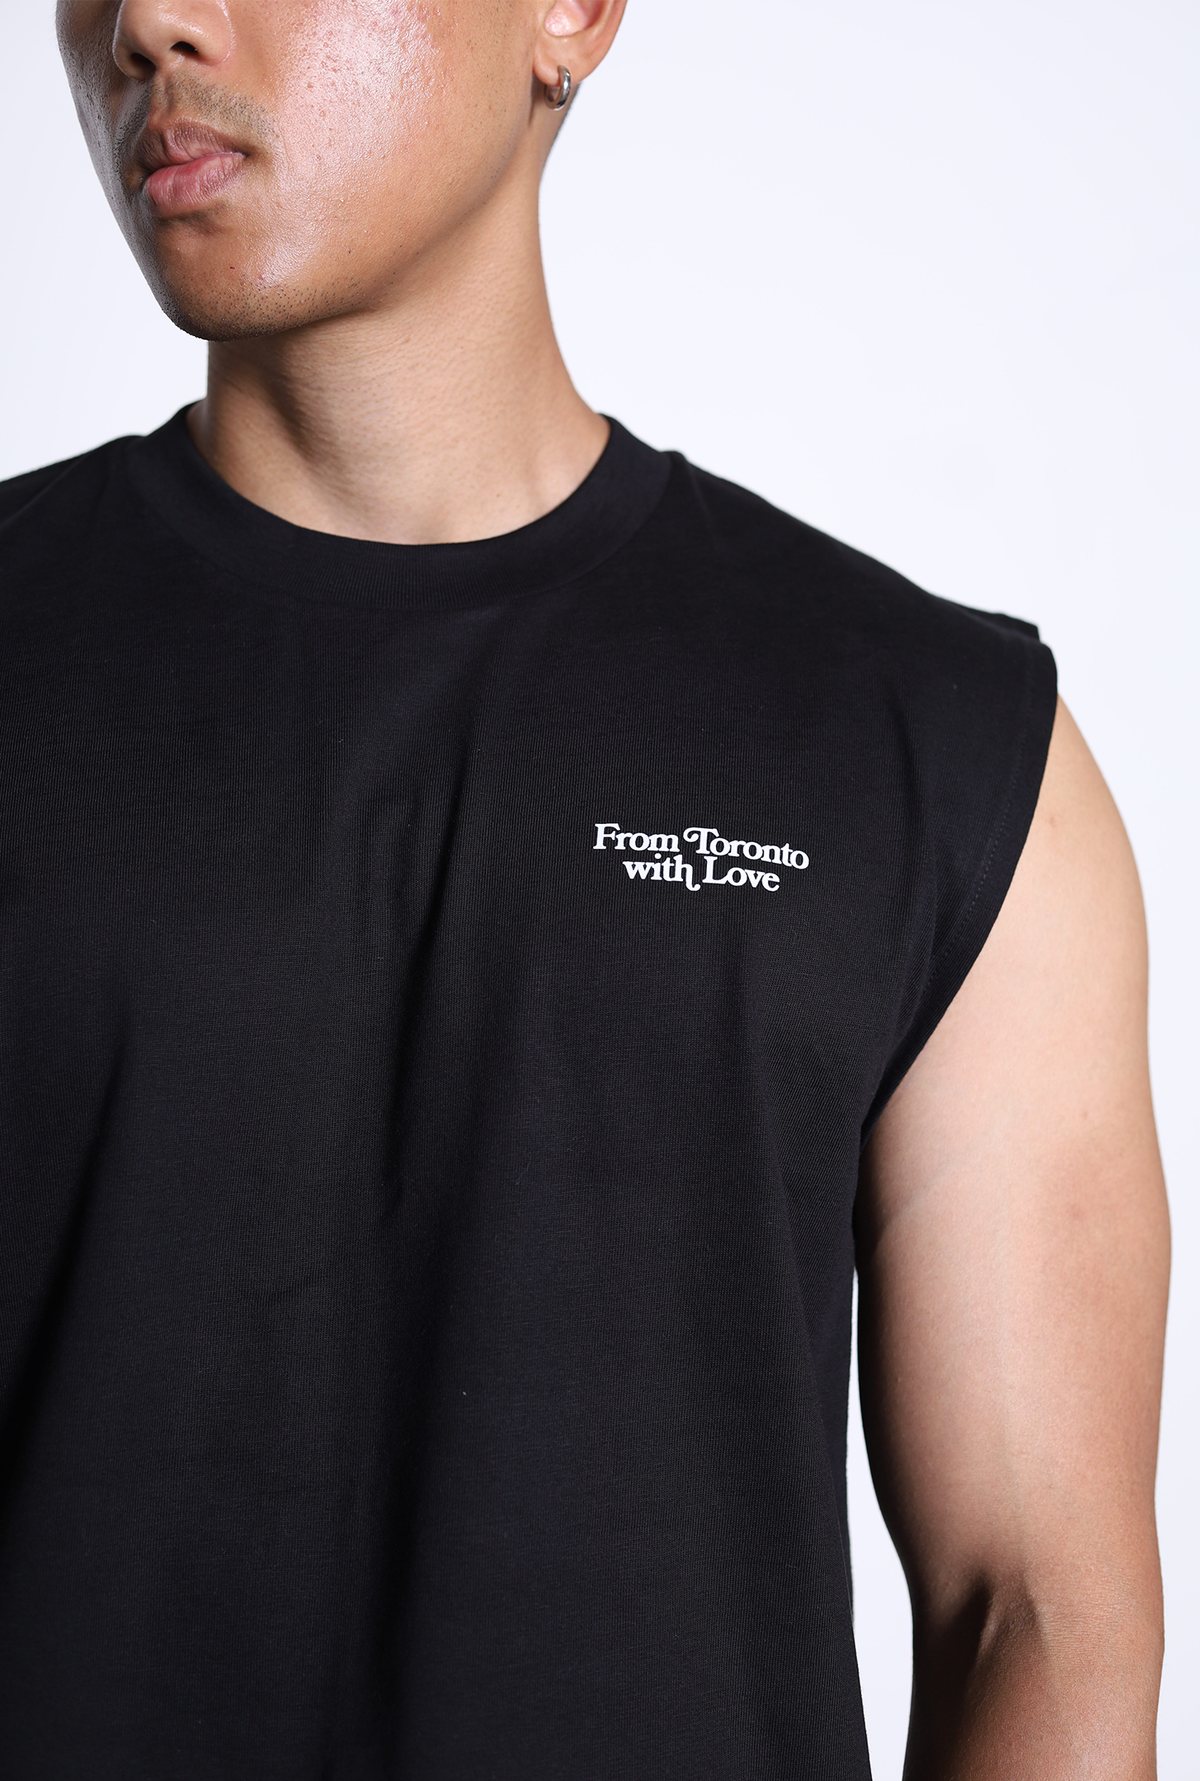 From Toronto with Love Classic Tank - Black